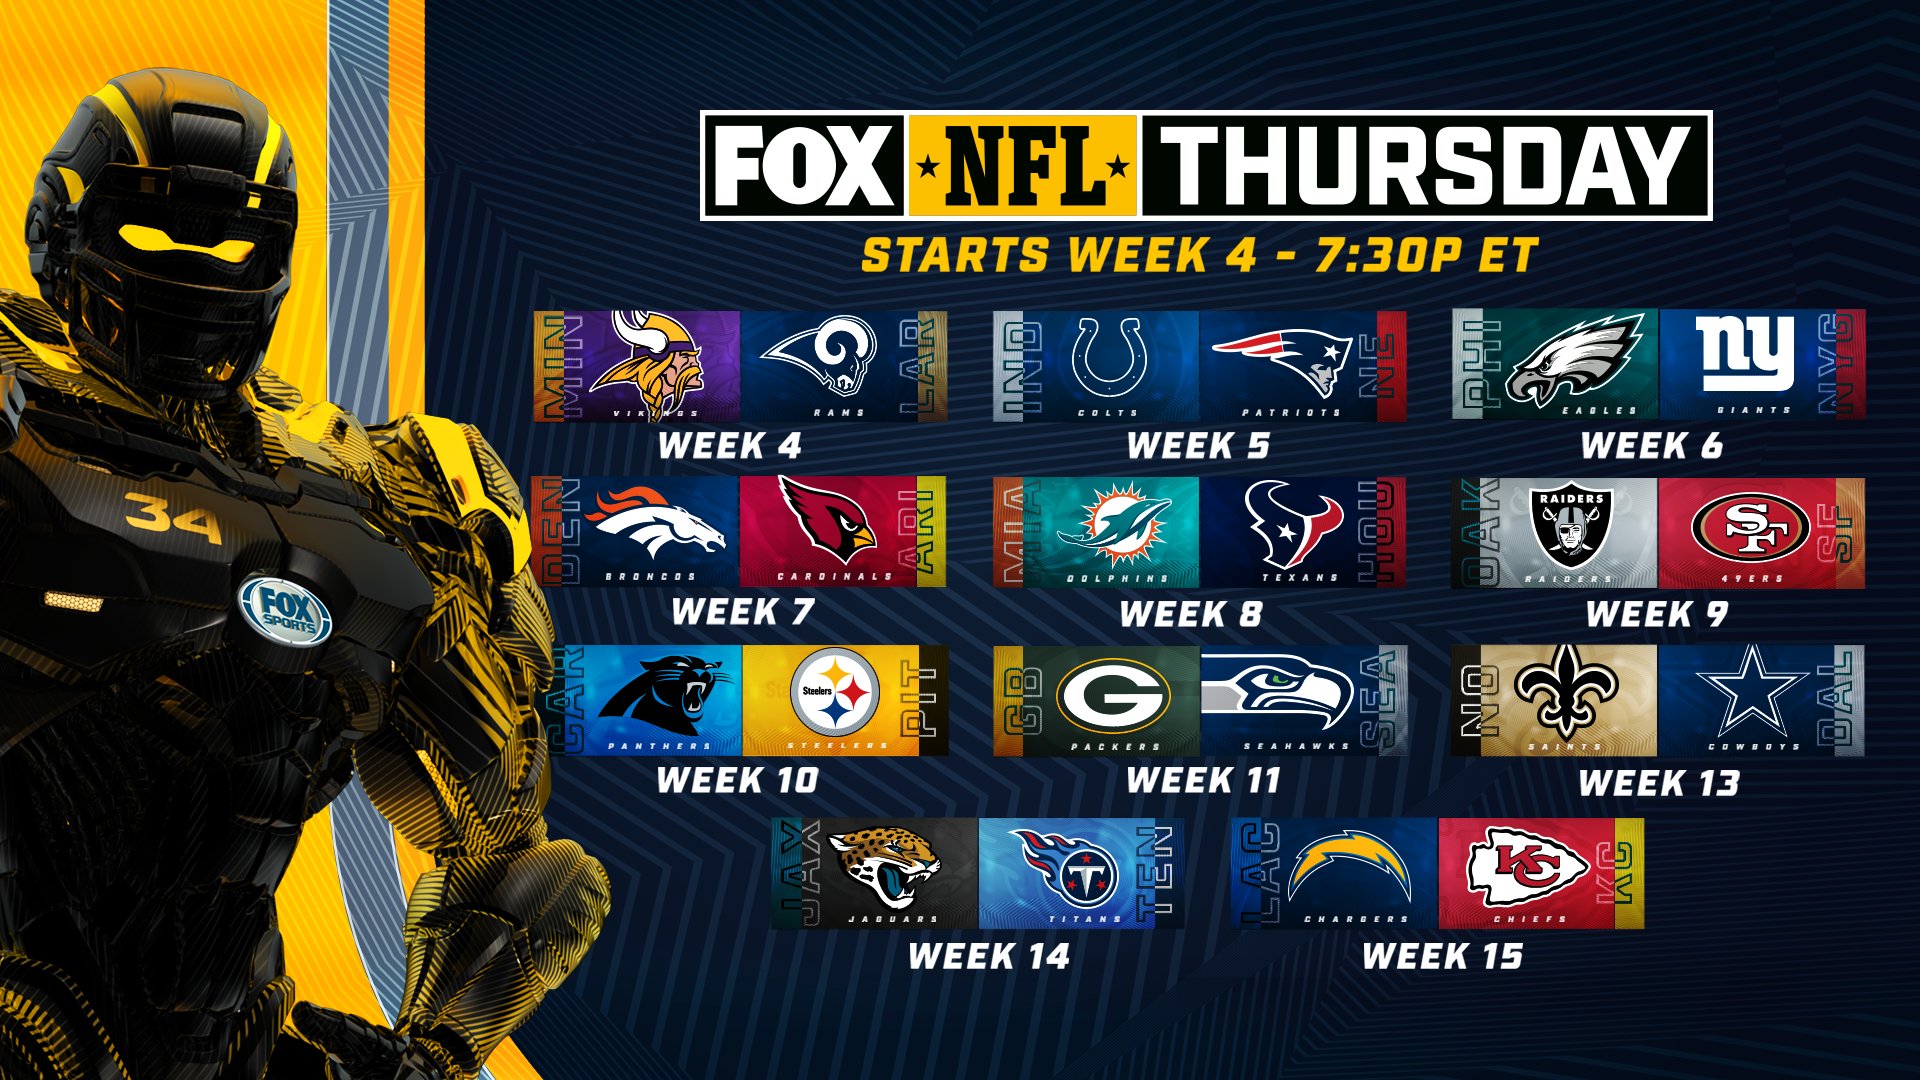 FOX Sports on X: ''This could be the best Thursday night schedule ever!' Thursday  Night Football is coming to FOX starting in Week 4. What game are you most  excited for this